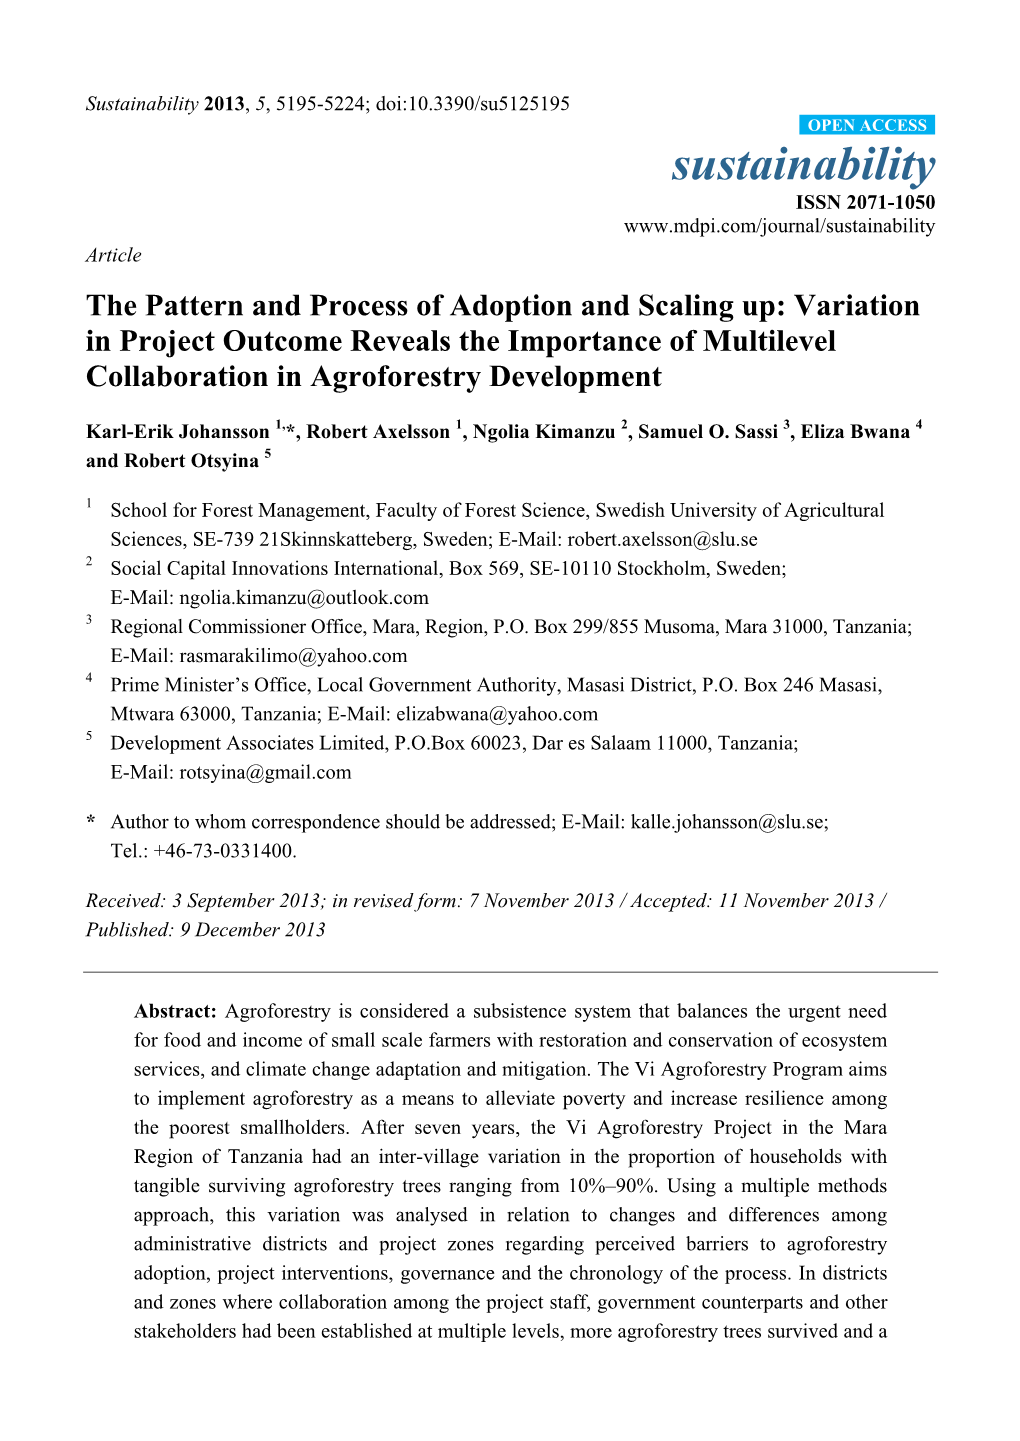 The Pattern and Process of Adoption and Scaling Up: Variation in Project Outcome Reveals the Importance of Multilevel Collaboration in Agroforestry Development